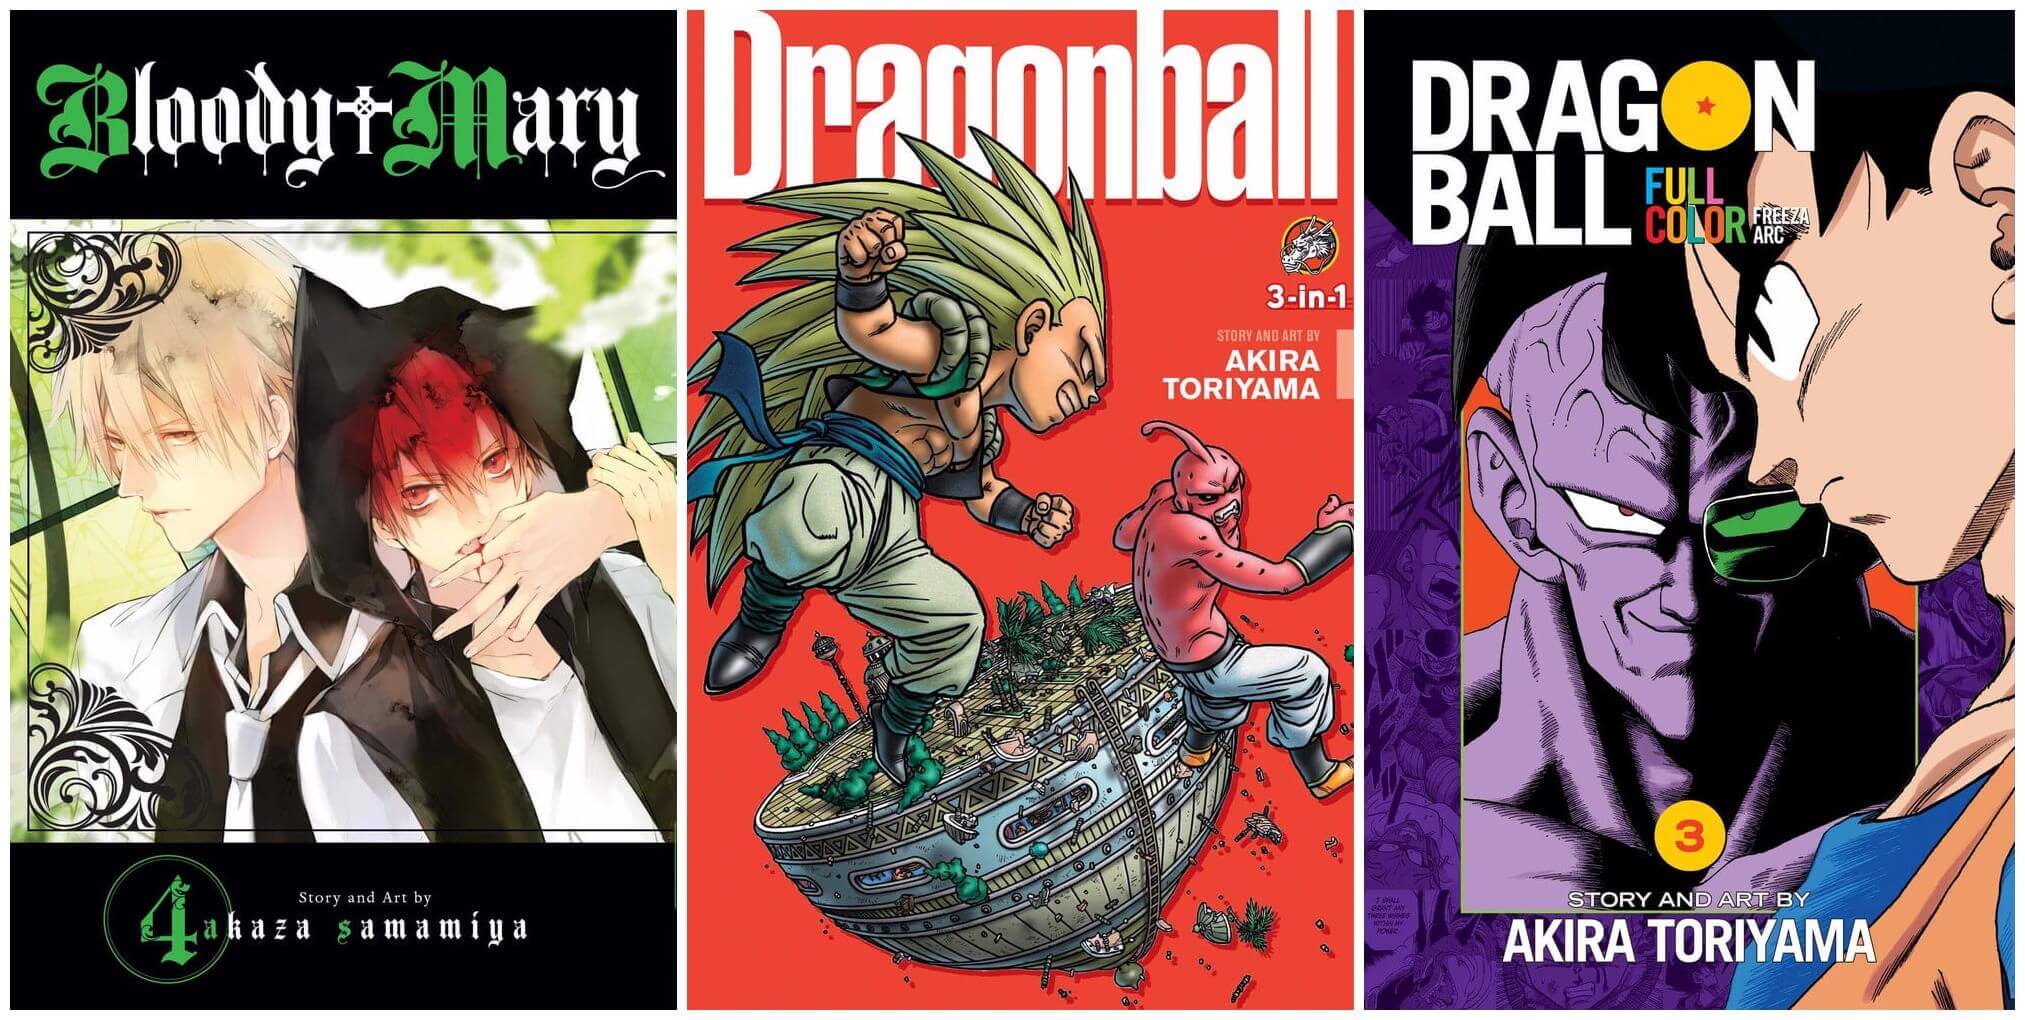 September 2016 Manga Releases Covers for Bloody Mary, Dragon Ball 3-in-1 Edition, and Dragon Ball Color.